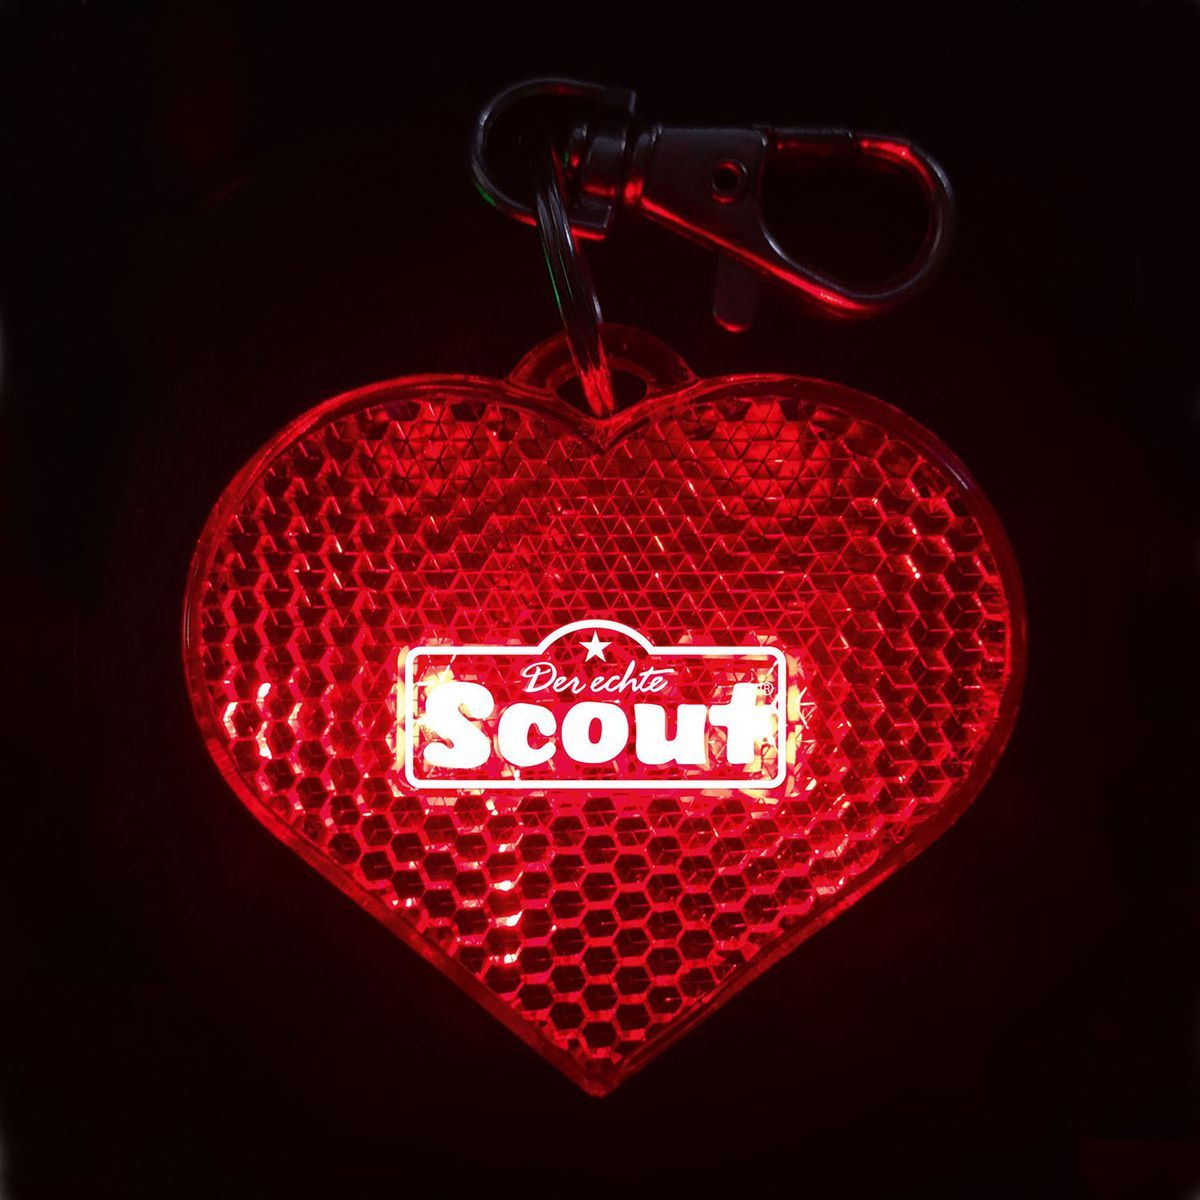 Scout Blinkie Pink Heart